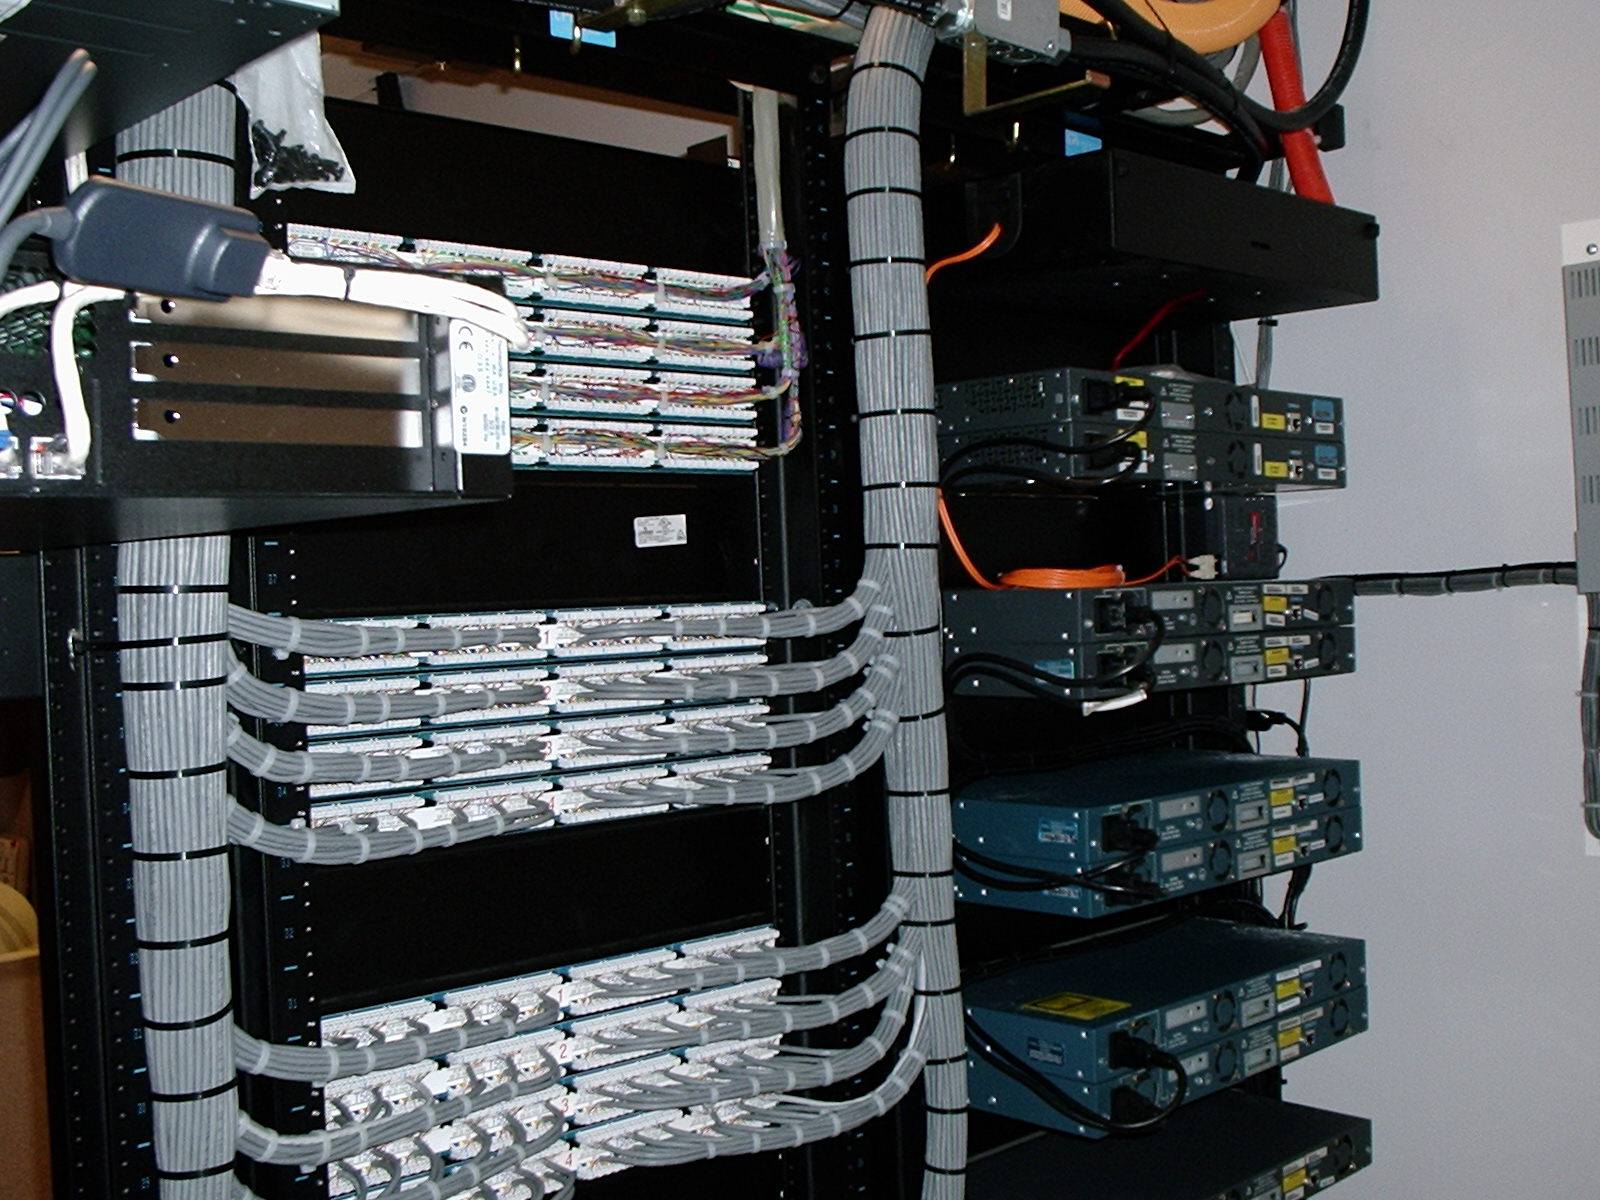 Network Rack, Structured Cabling Products, Structured Cabling Design, Cat5E, Cat6, Cat6A, Fiber Optic Cable, Coaxial Cable, Structured Cabling, Cabling, Network Cabling, Data, Data Wire, Structured Wiring System, Cat6, Tel-Data Communications, Data cabling, telephone cabling, network infrastructure, connectivity solutions, cable management, industry standards, voice communication, data transmission, scalability, professional installation, data and telephone cabling